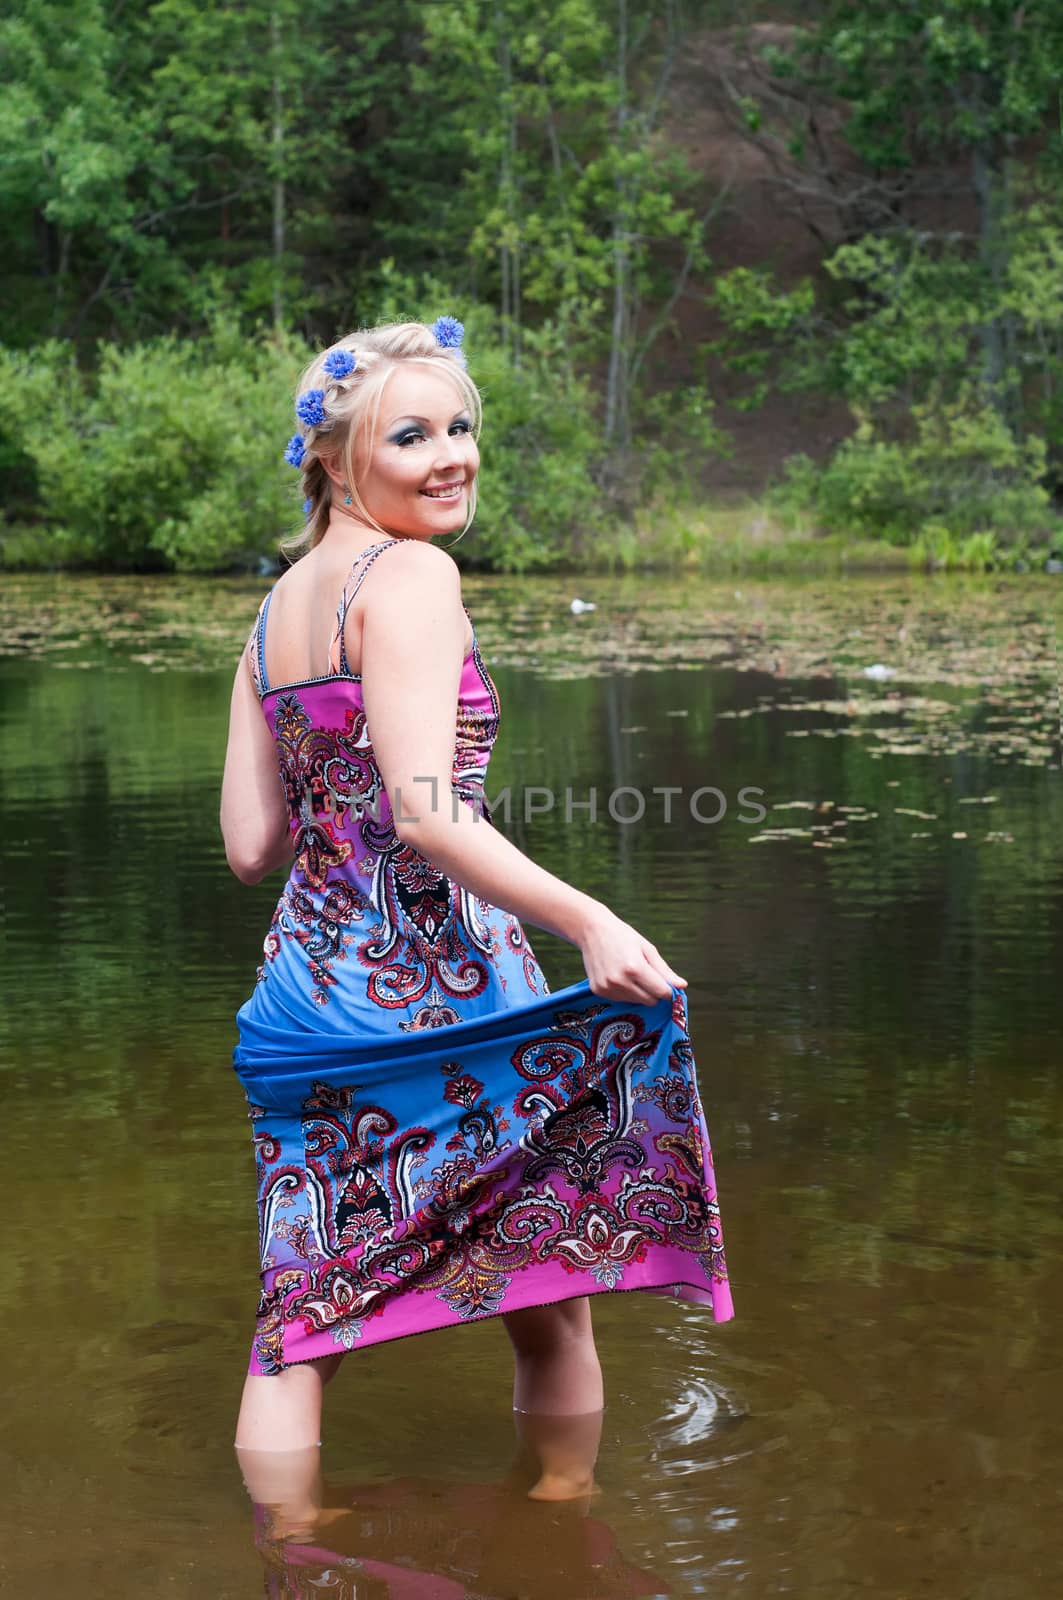 Beautiful woman in long dress standing in pond